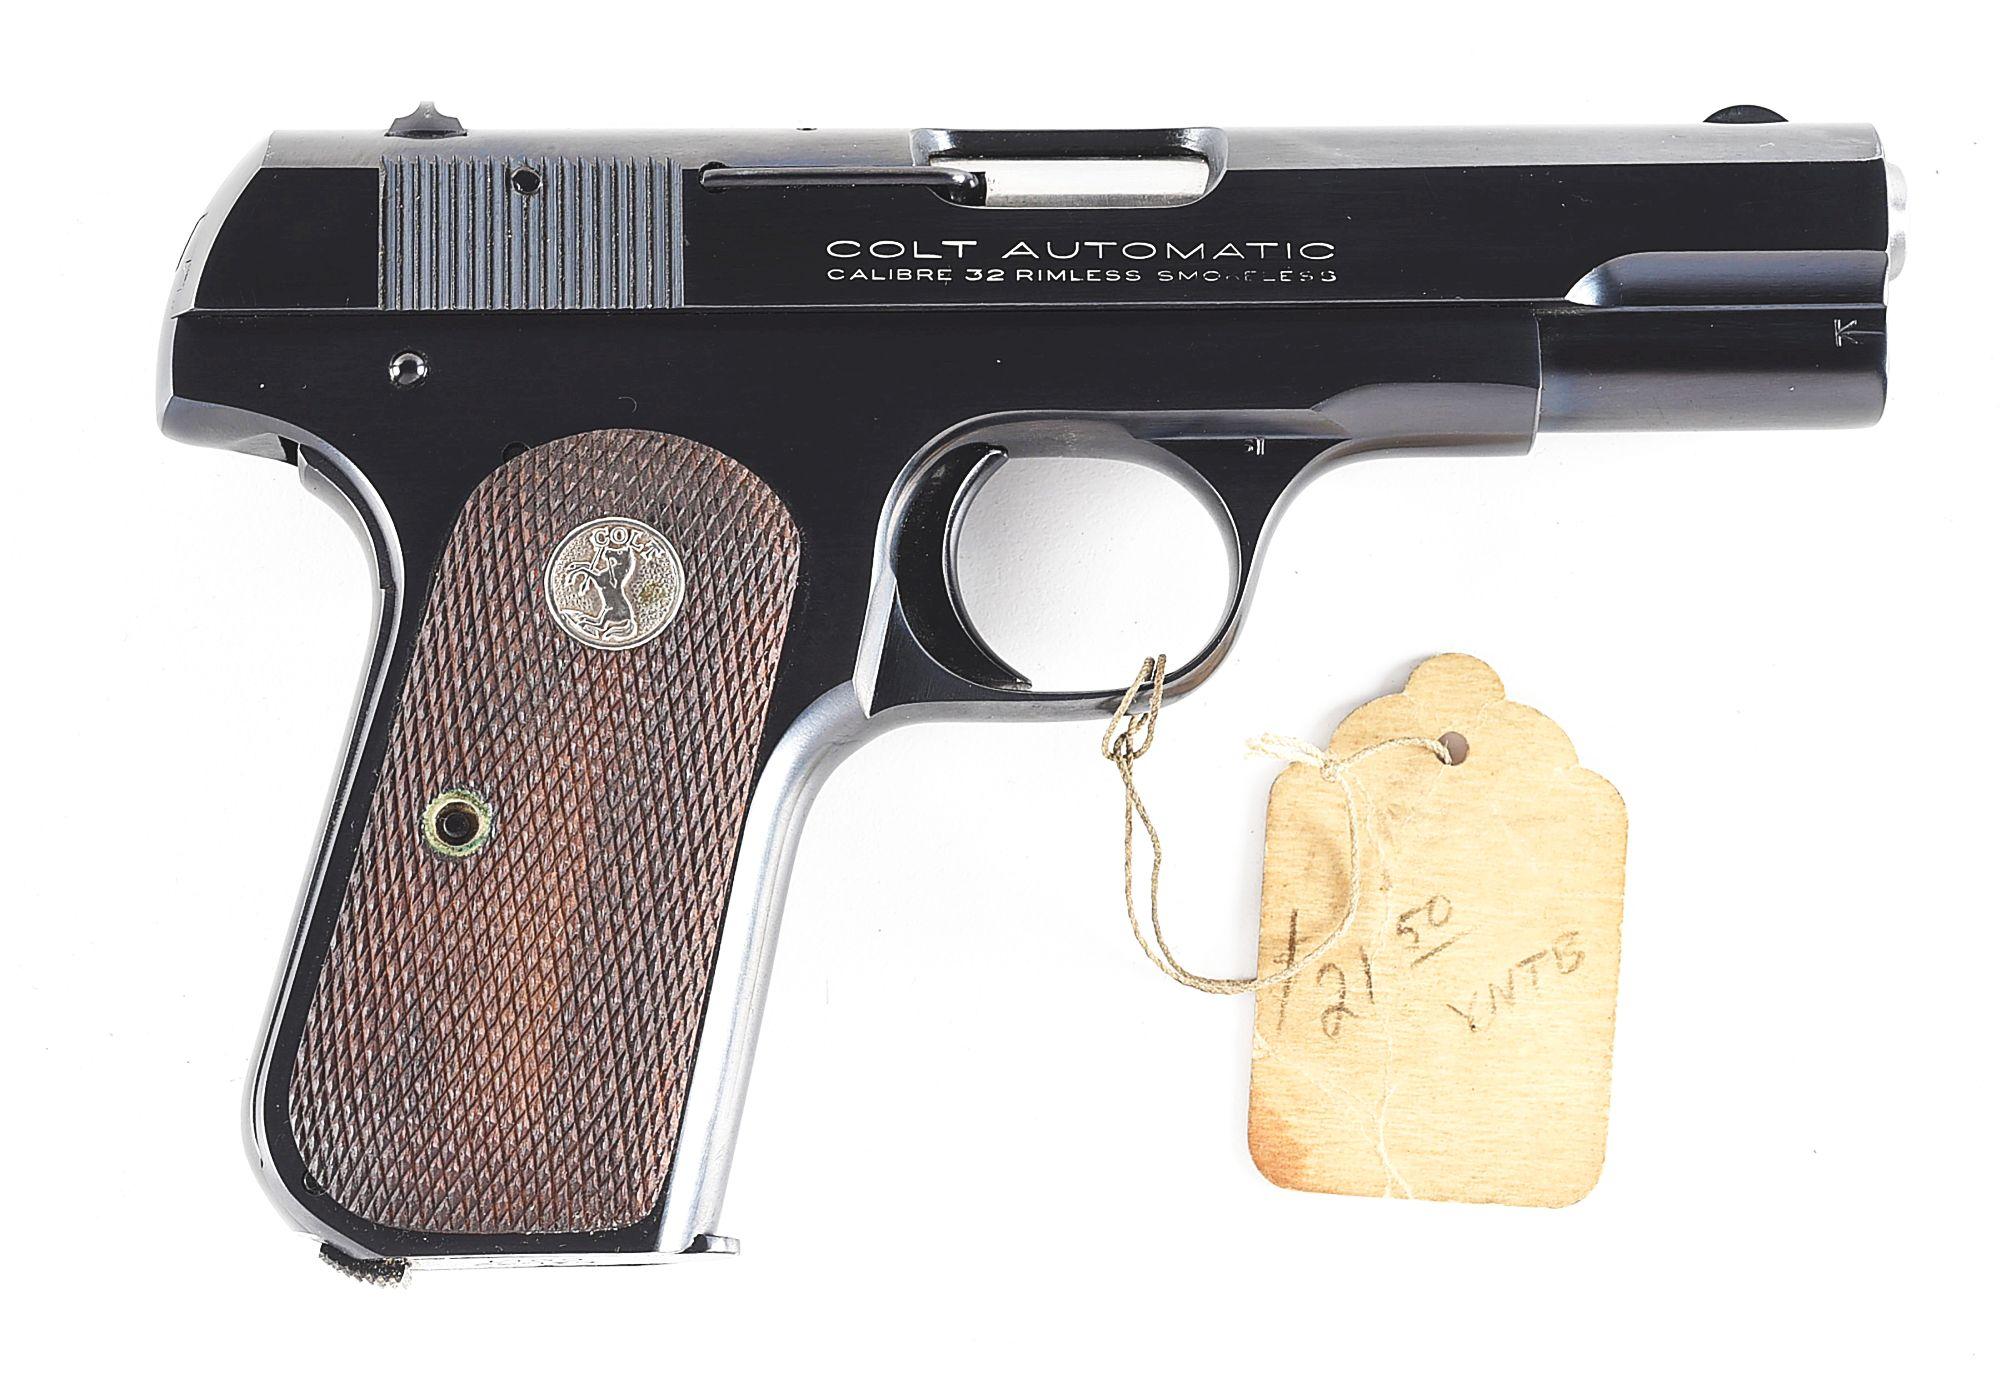 (C) AS NEW IN THE BOX COLT MODEL 1903 POCKET HAMMERLESS SEMI AUTOMATIC PISTOL.